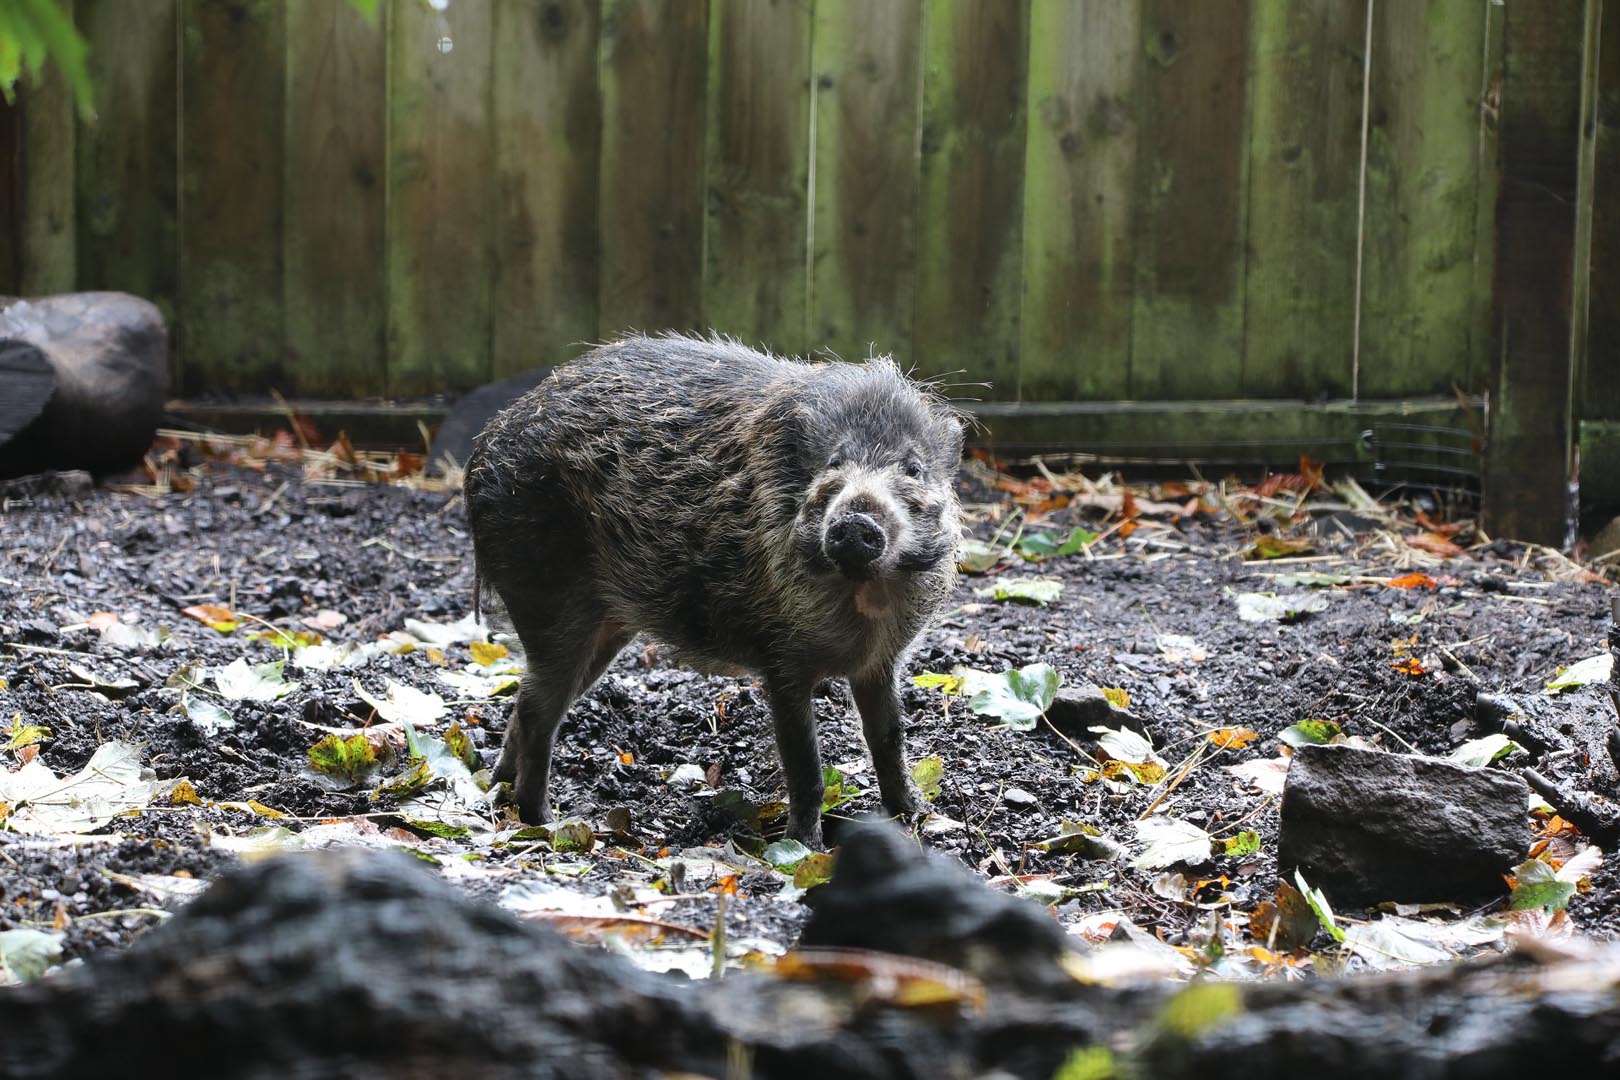 Visayan warty pig facing camera with fallen leaves around on ground Image: AMY MIDDLETON 2023